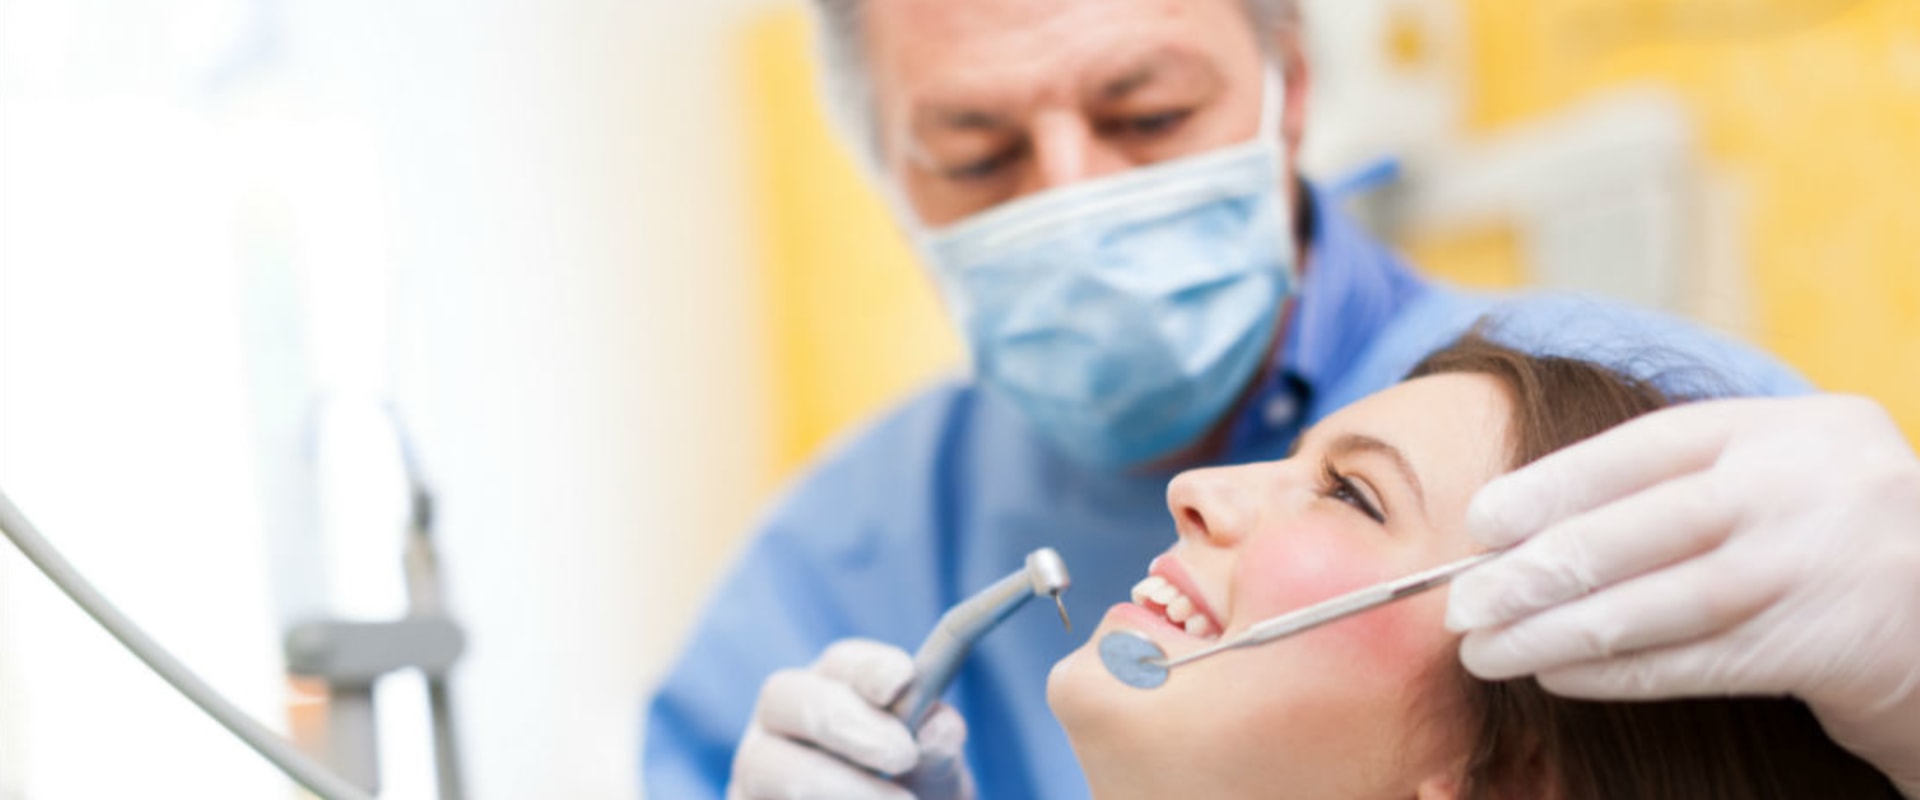 What are the three important qualities that dentists need?